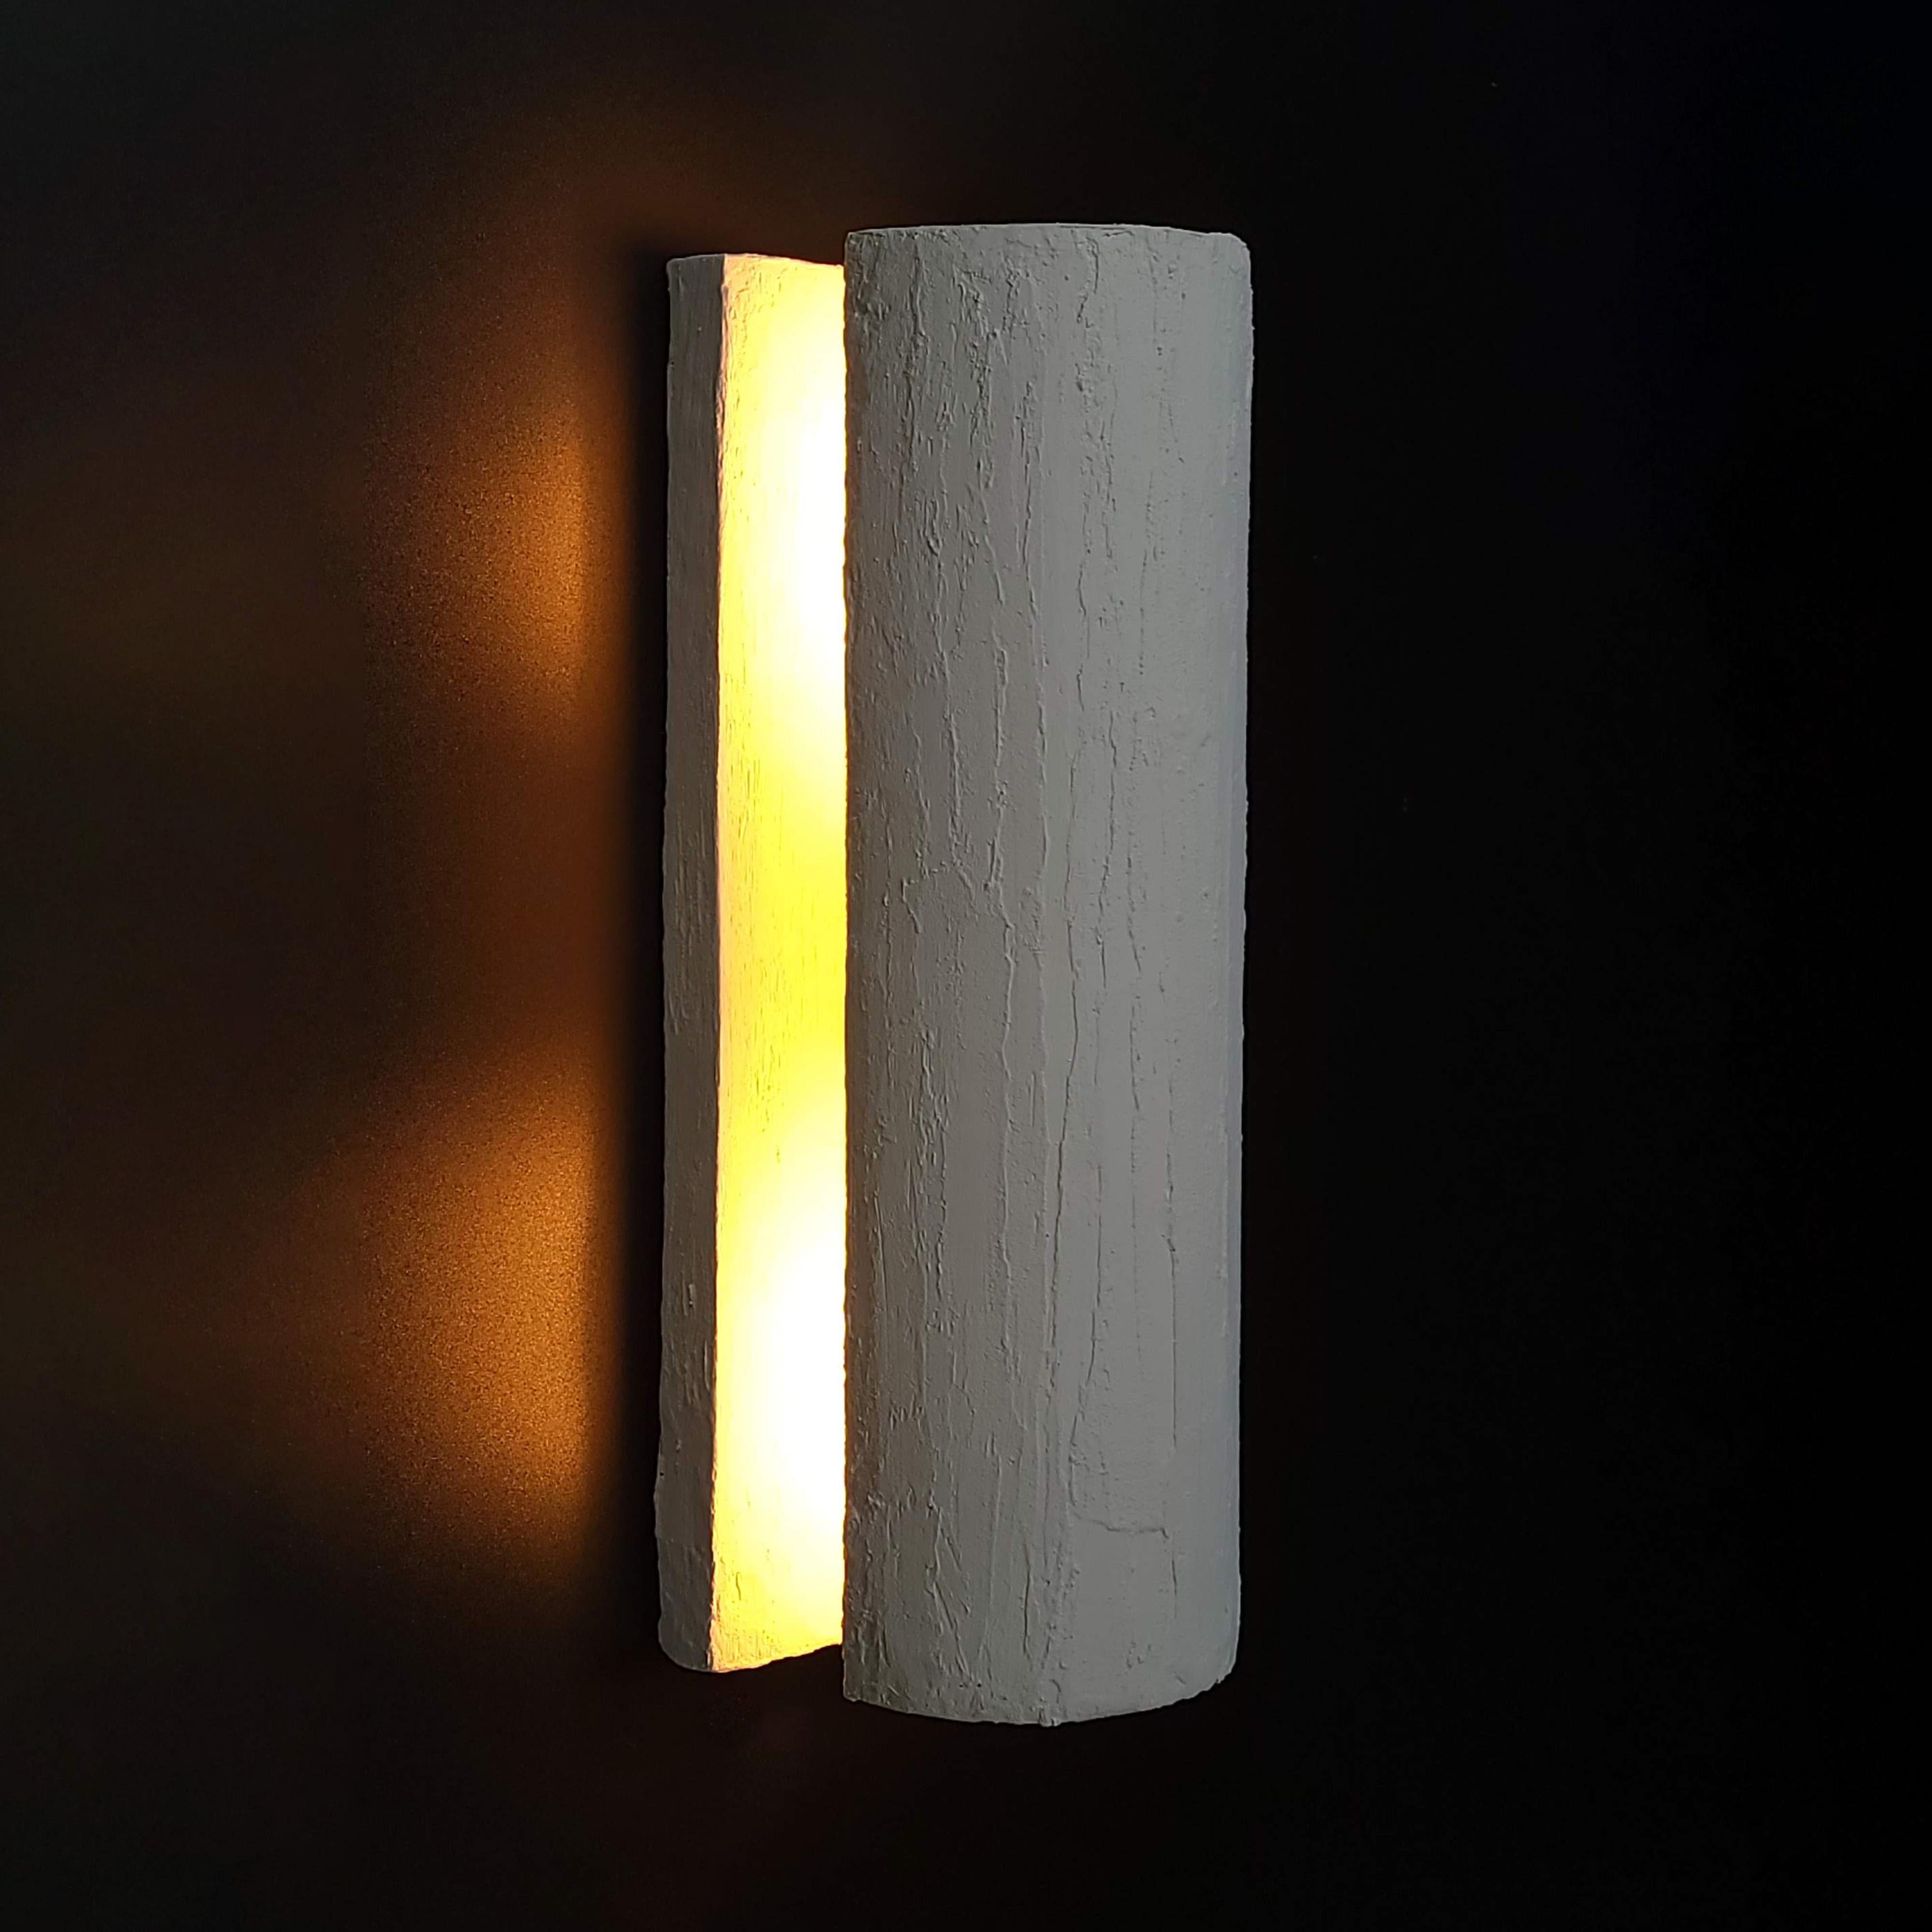 Introducing our Minimalist Plaster Cylinder Wall Sconce, designed to infuse your space with serene lighting and a touch of modern simplicity. This fixture's cylindrical form is a nod to minimalist aesthetics, focusing on the pure interplay of light